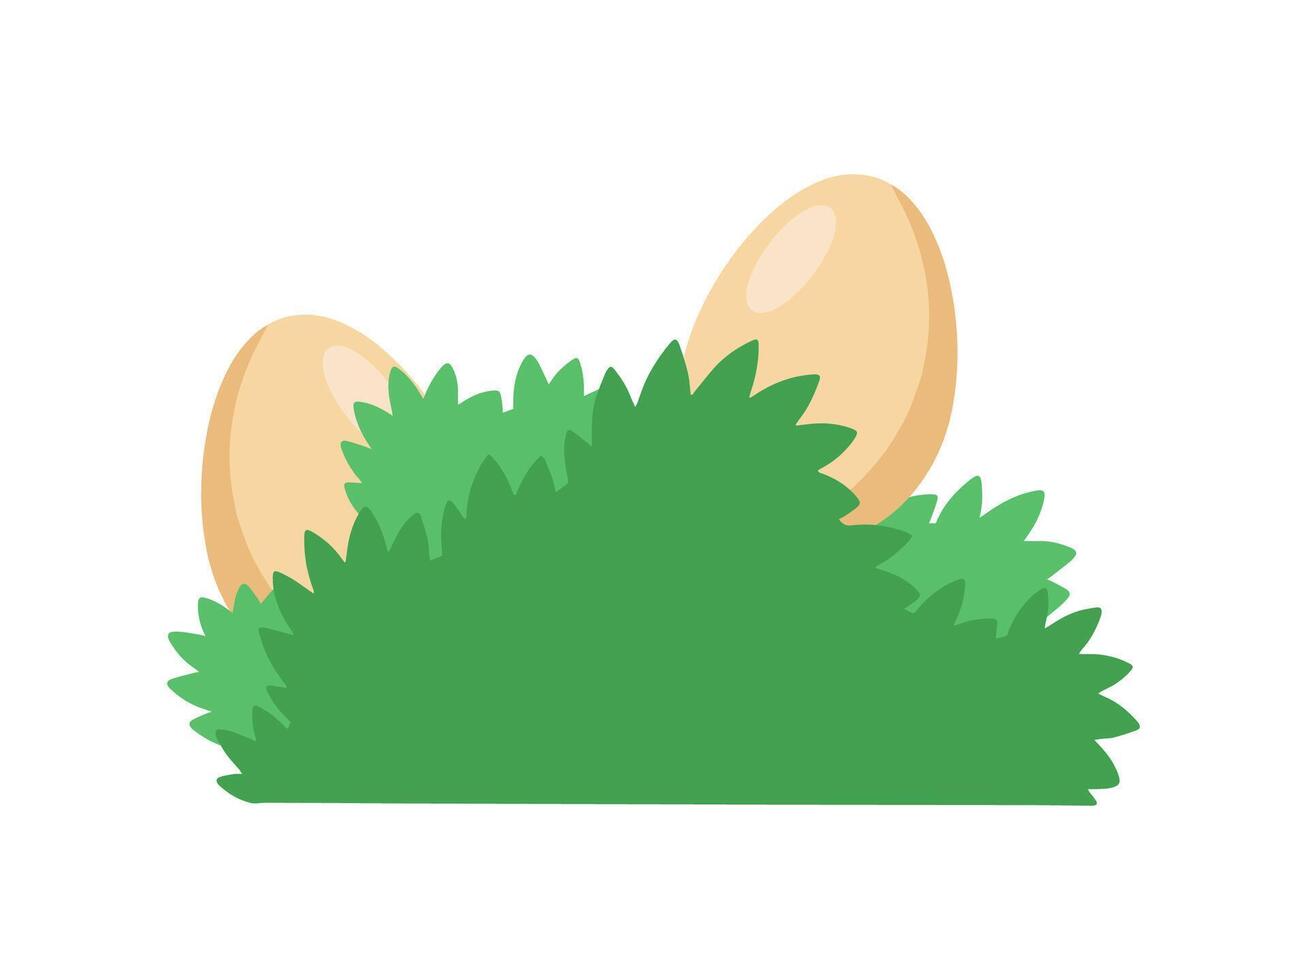 Easter Eggs Background Lying in Grass vector